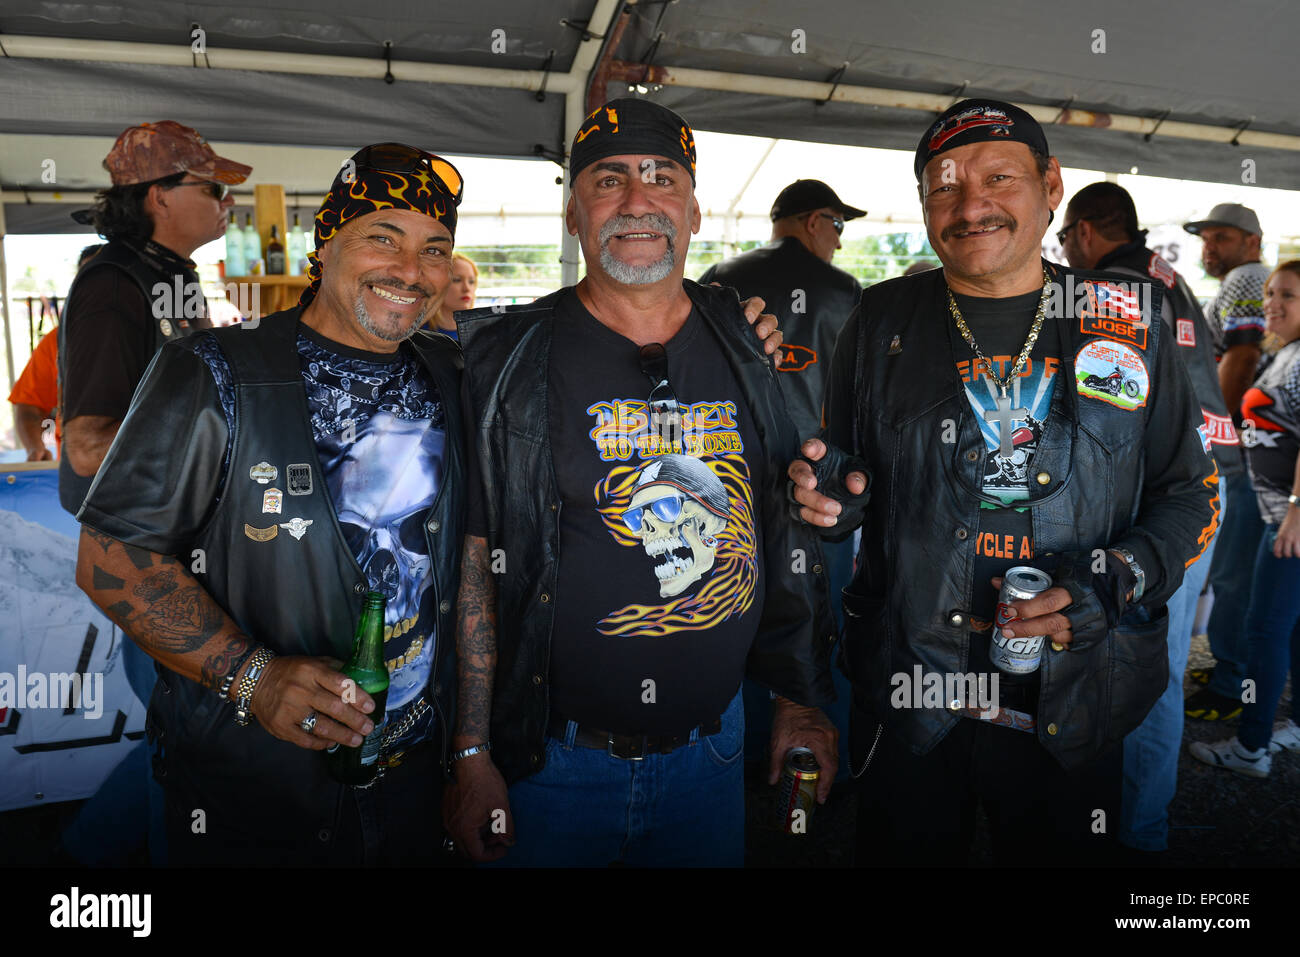 Friends at a motorcycle event in Ponce, Puerto Rico. Caribbean Island ...